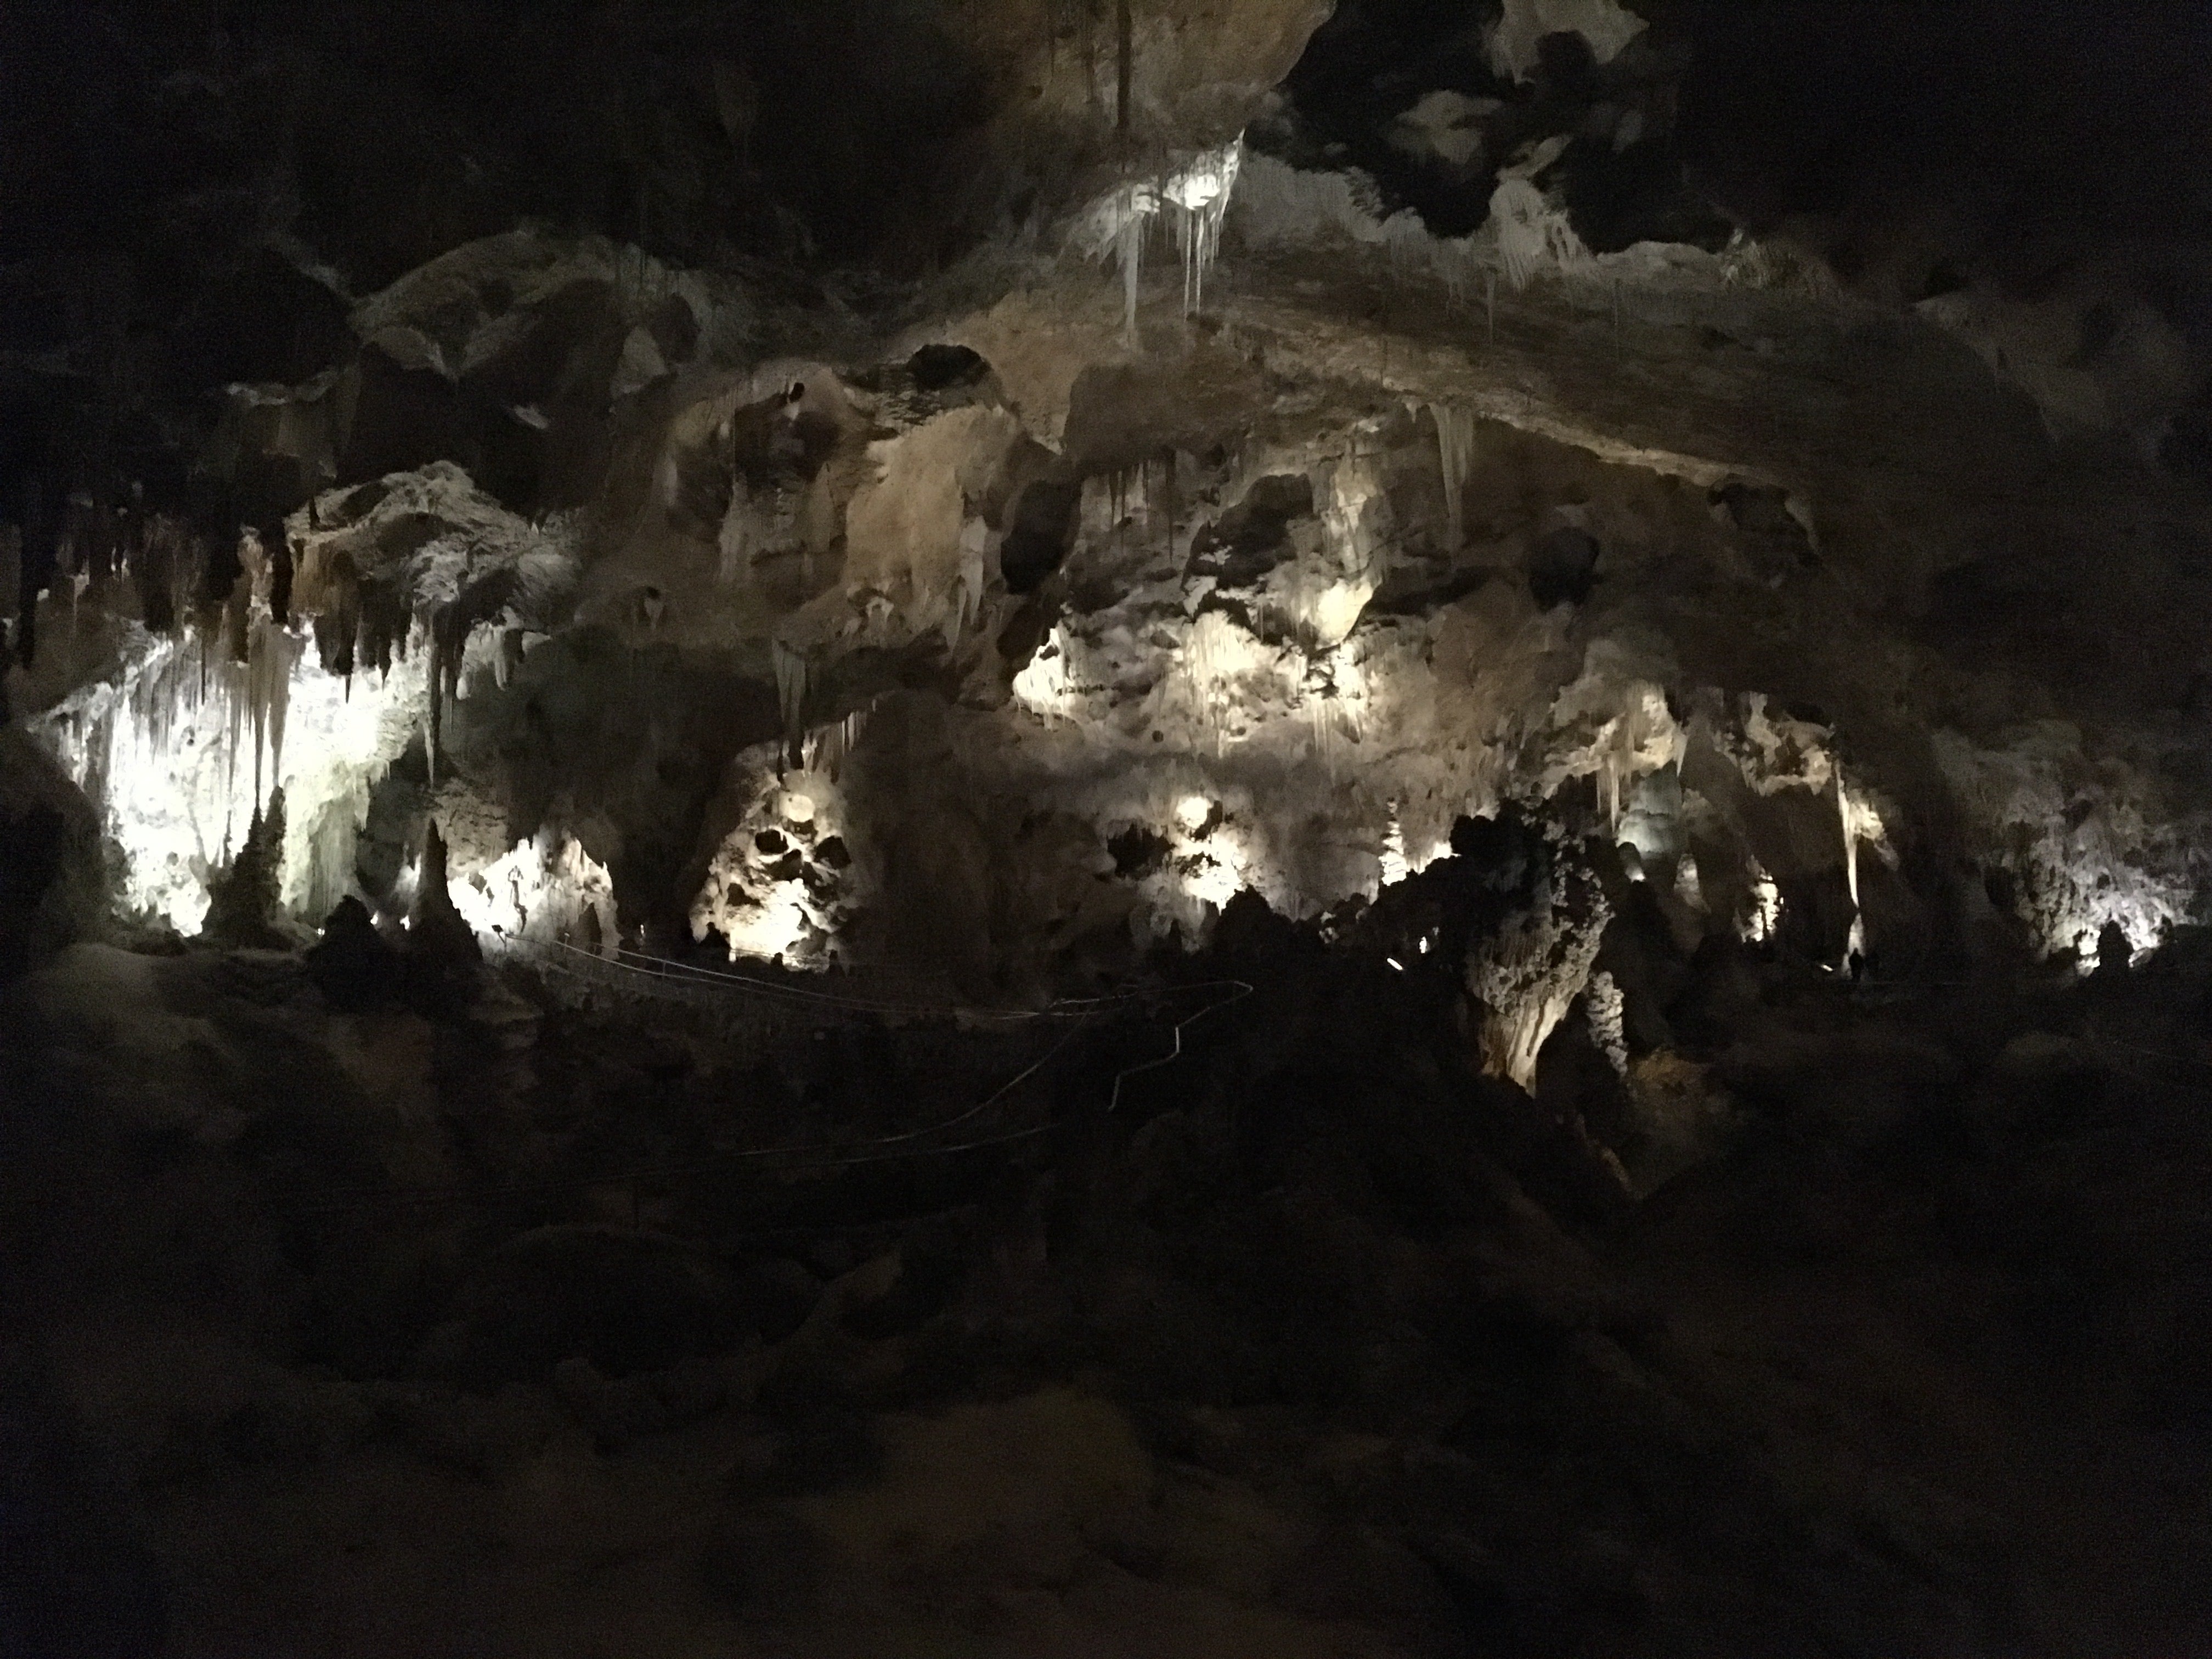 Unique rock formations inside the caverns